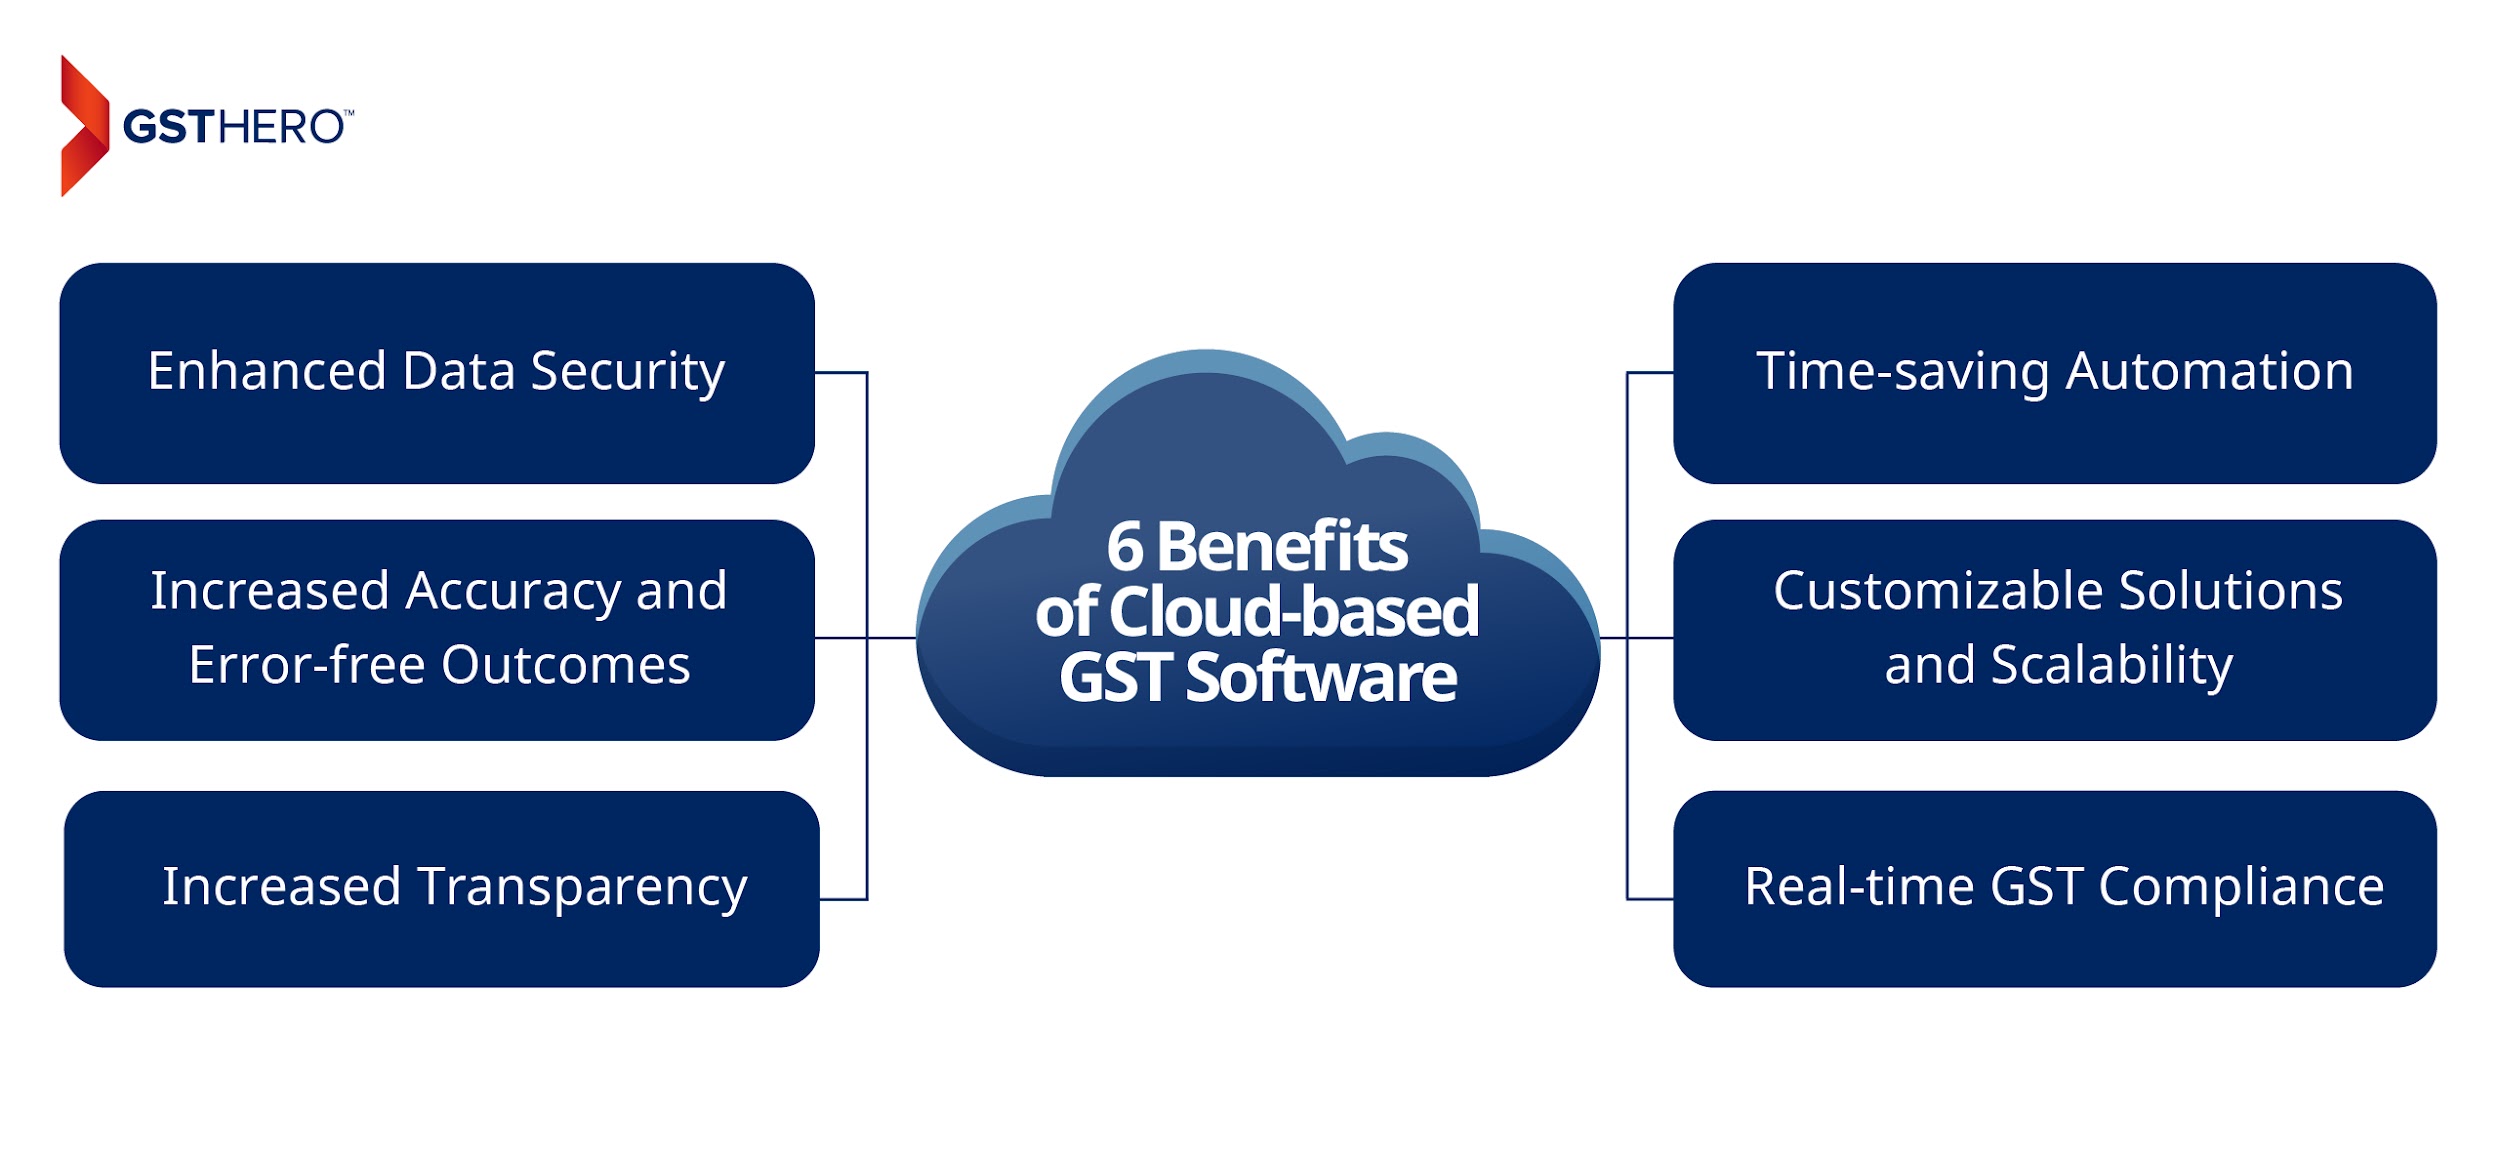 6 Benefits of Cloud-based GST Software